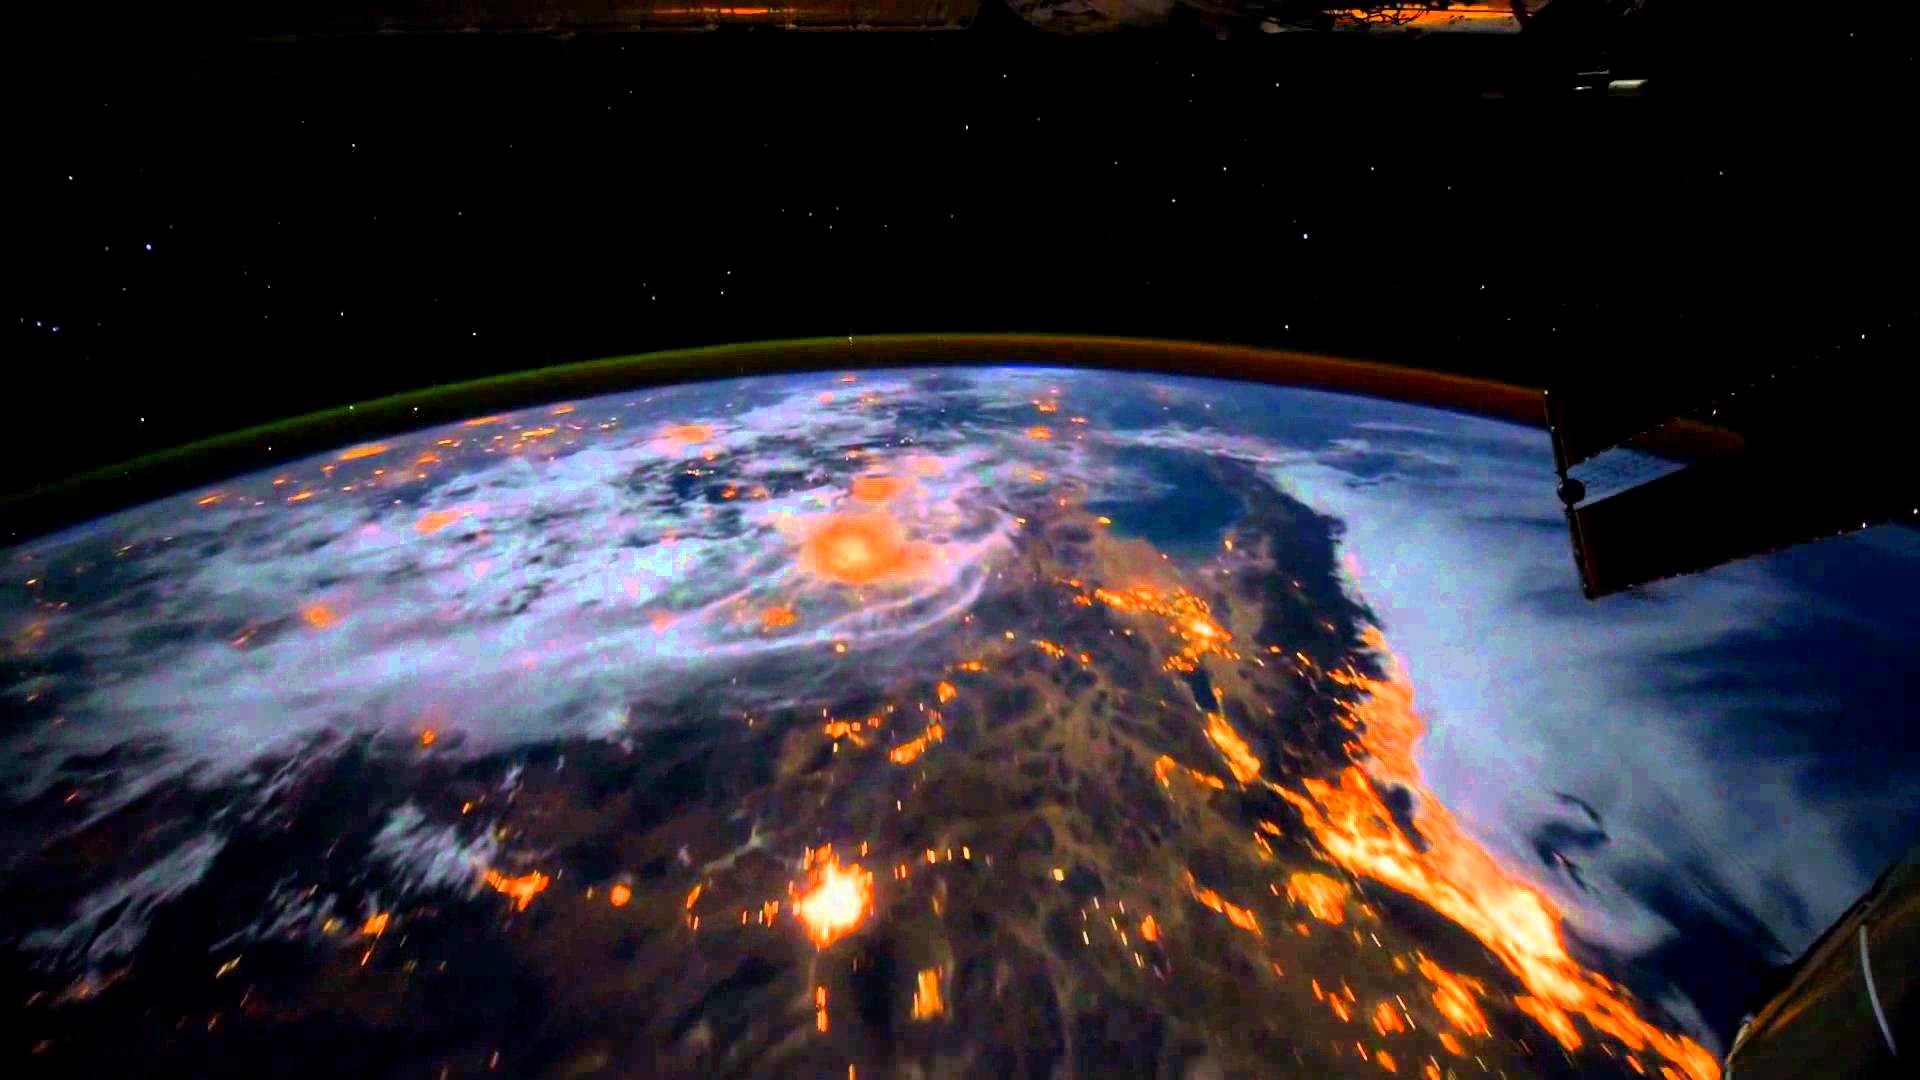 Dreamscene Animated Wallpaper – Earth View from the ISS – YouTube